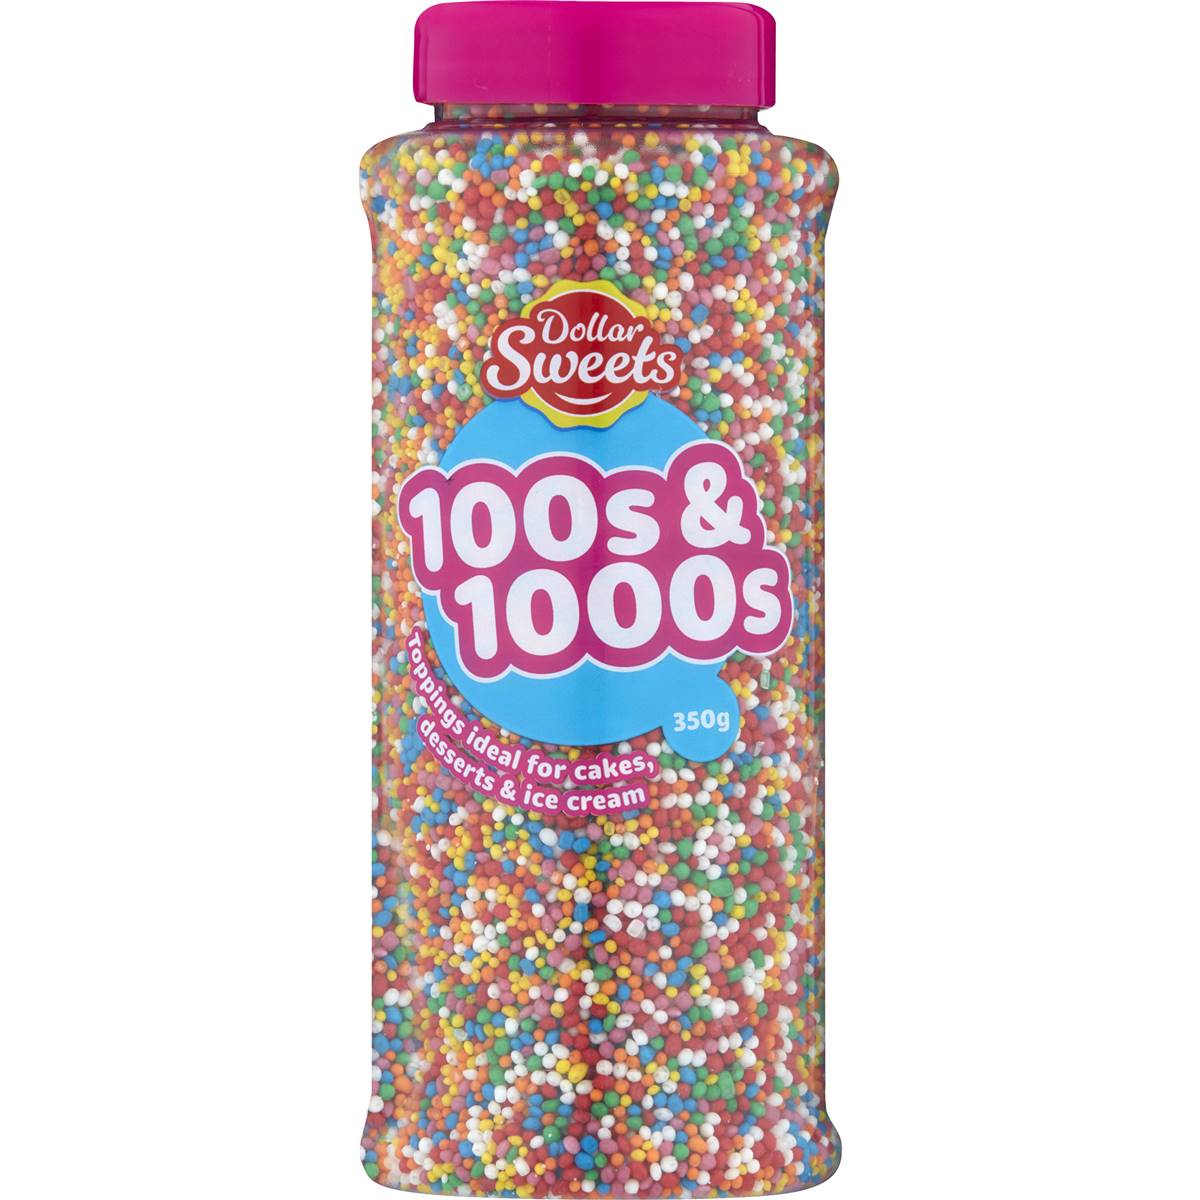 Calories in Dollar Sweets Sprinkles Magic 100s & 1000s